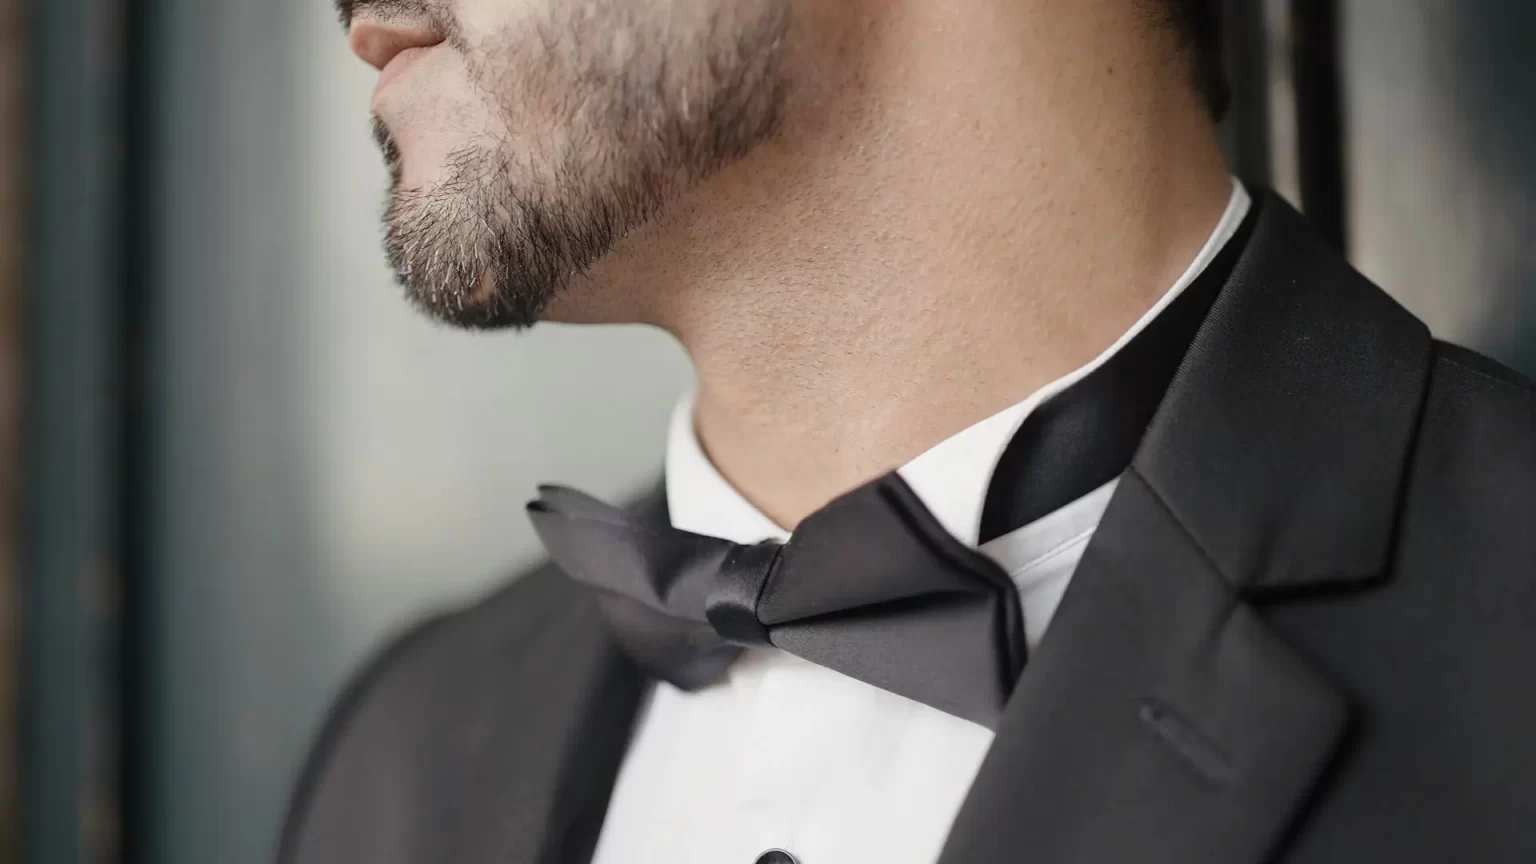 Close-up of a person wearing a black tuxedo, white dress shirt, and black bow tie. The shot focuses on the lower face and neck, showing a neatly trimmed beard.